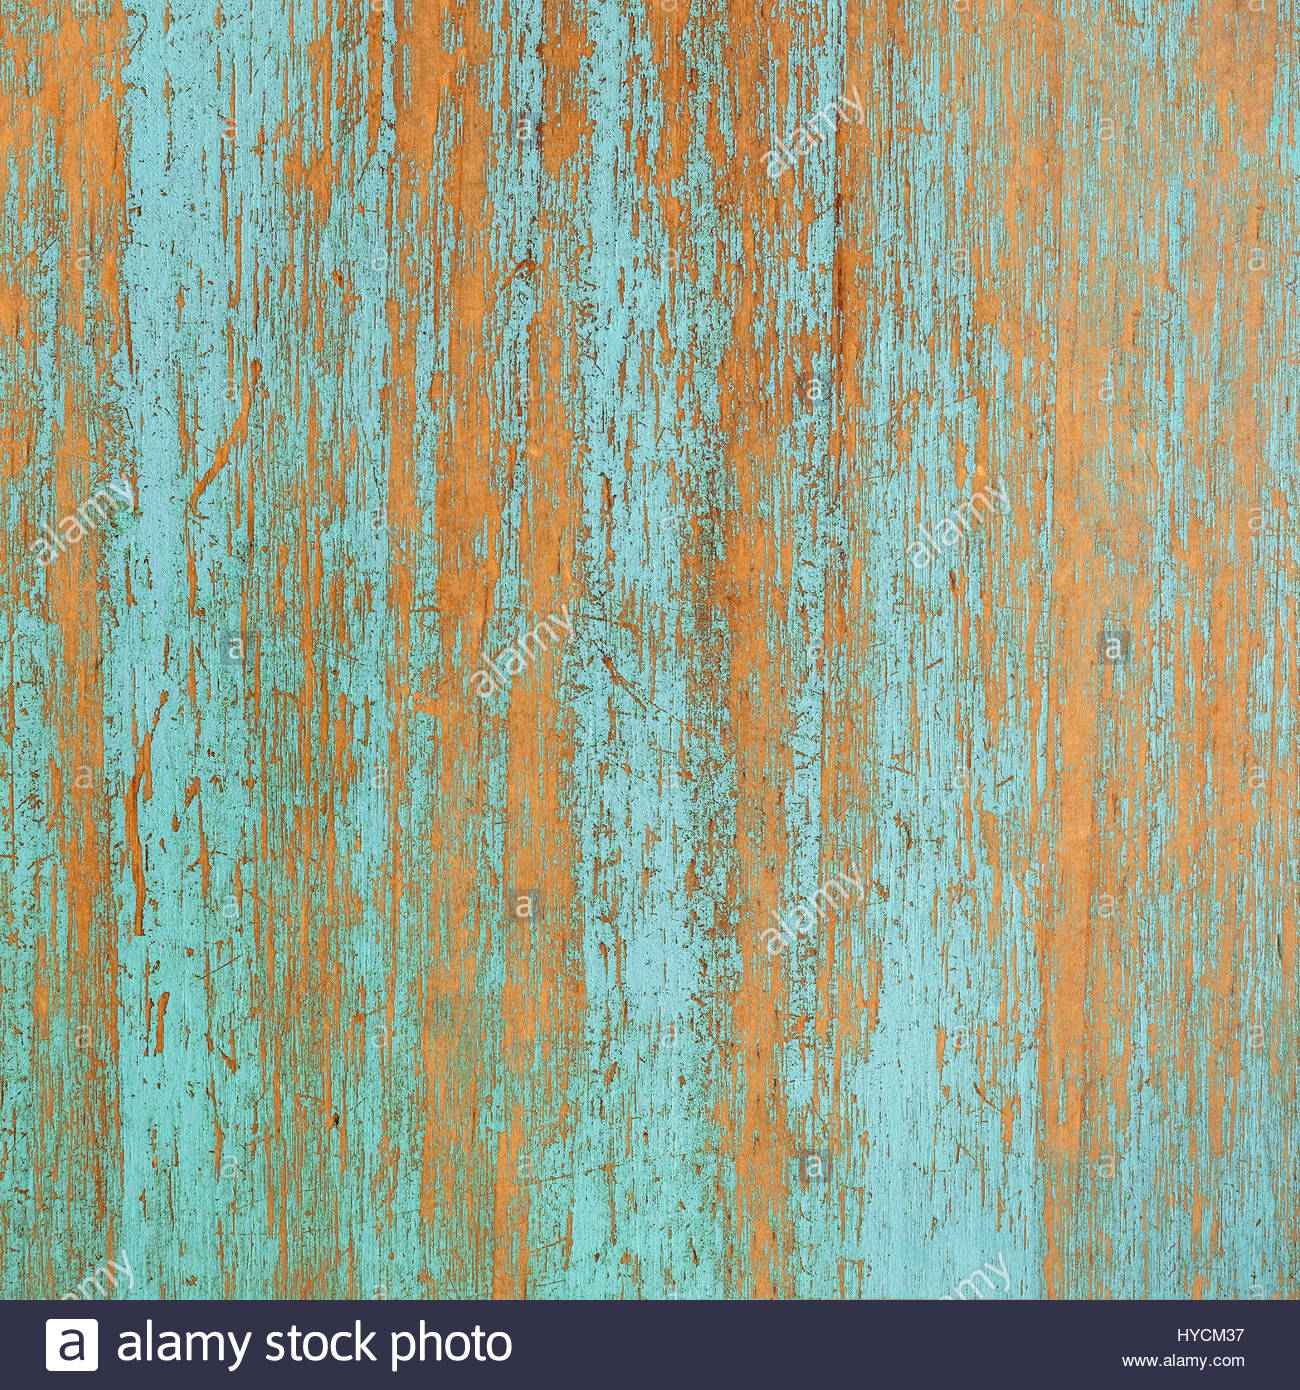 Teal And Orange Wooden Boards Background Texture Stock Photo